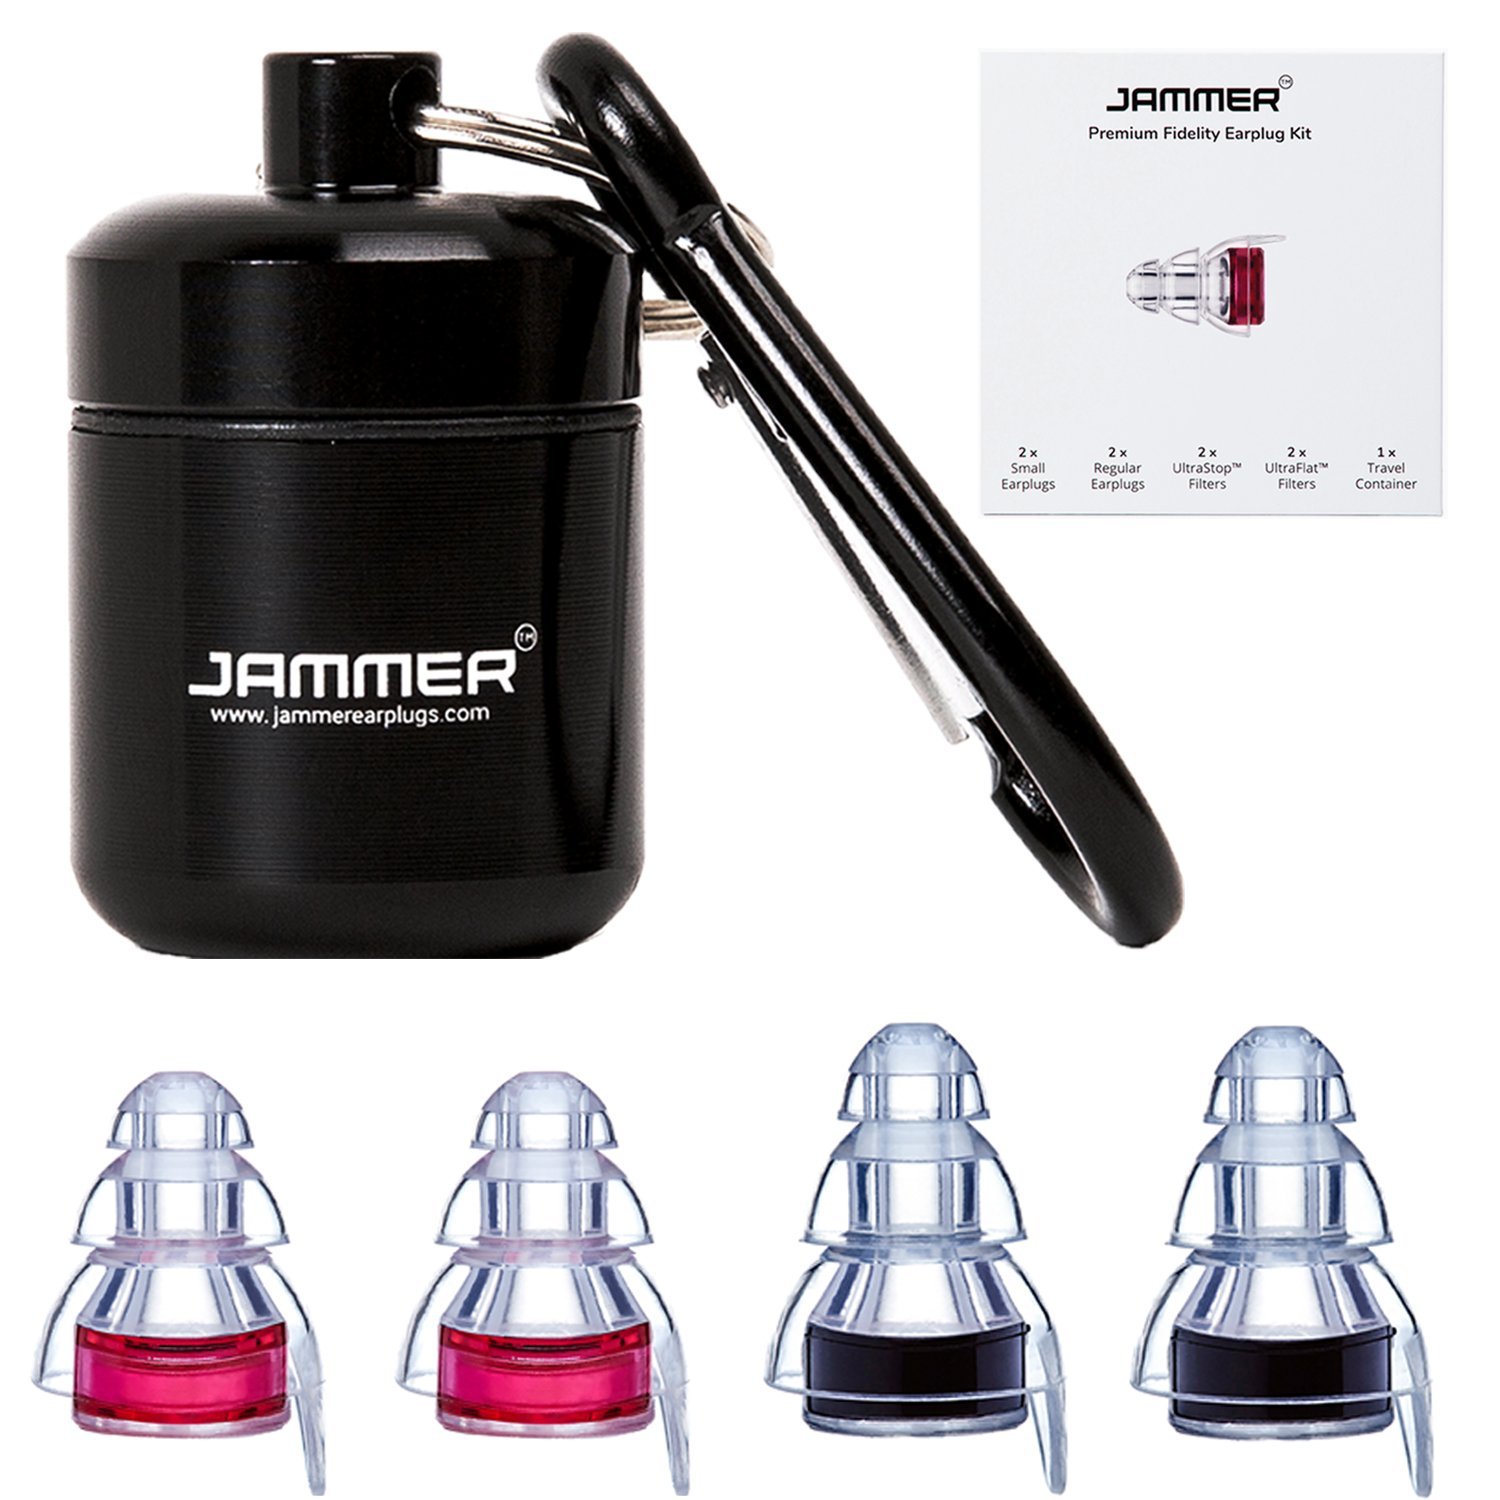 Jammer Premium Earplug Kit for Concerts Musicians Bands DJs Nightclubs Motorcycles Sleeping - High Fidelity Noise Reduction - Noise Cancelling - Reusa 1